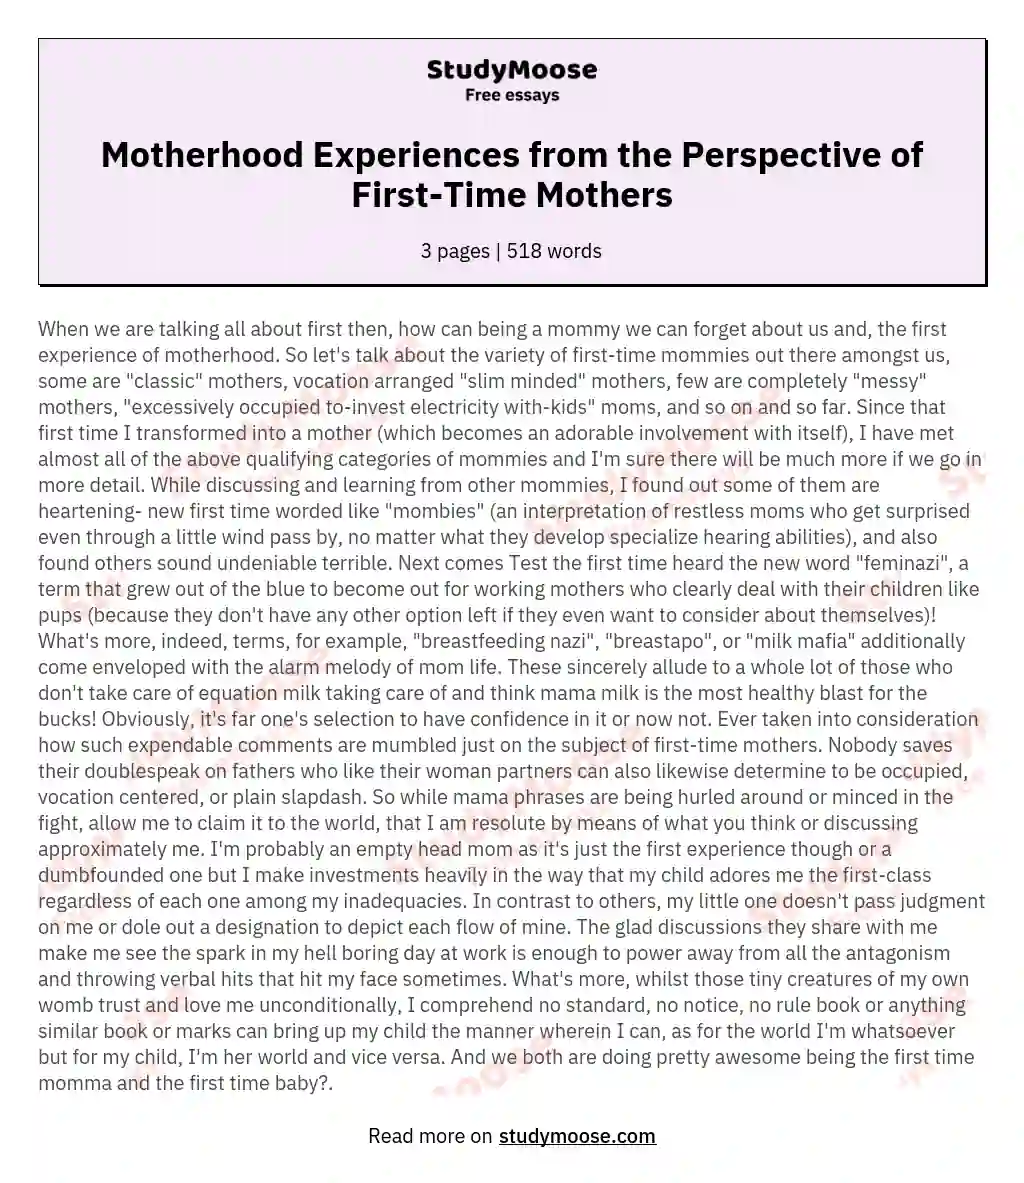 Motherhood Experiences from the Perspective of First-Time Mothers essay